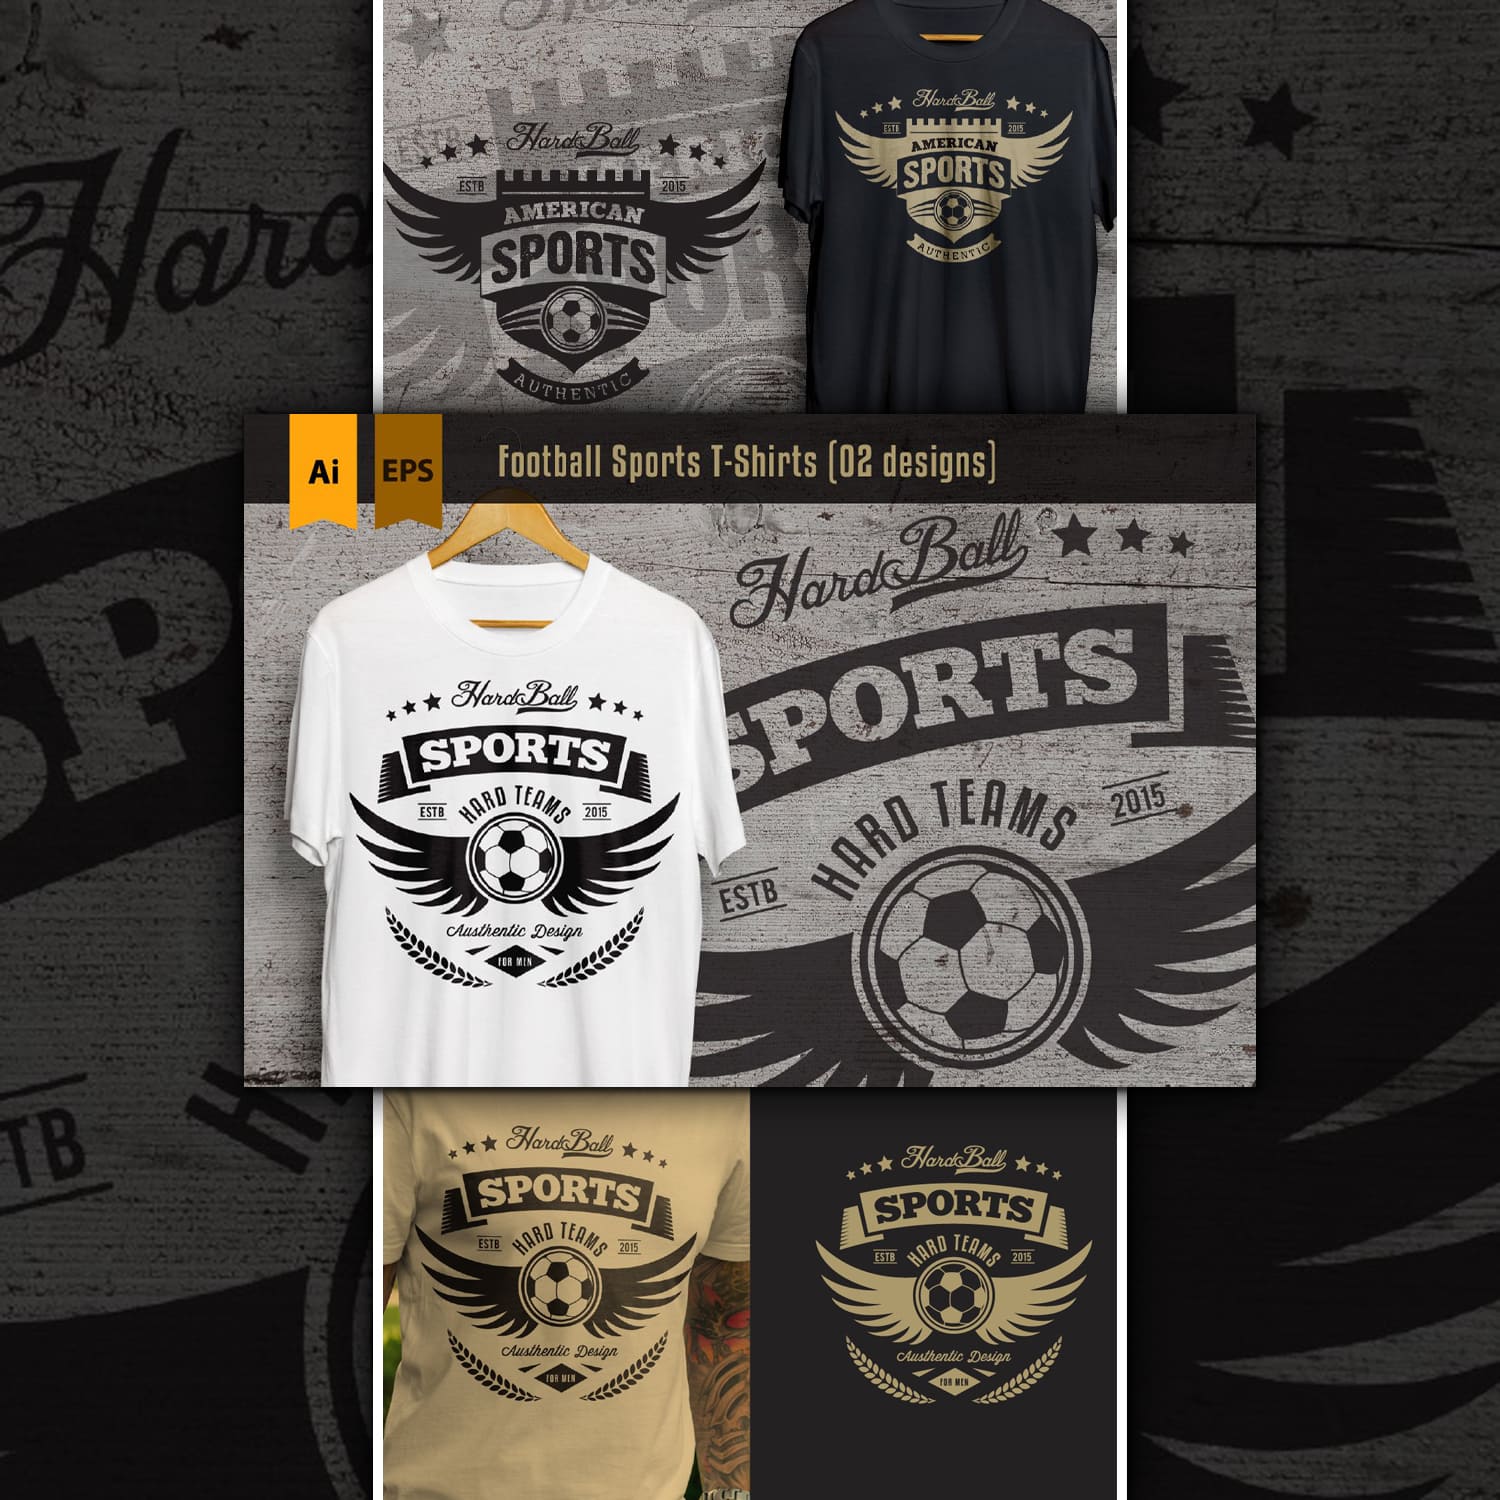 Football Sports T-Shirts Cover.